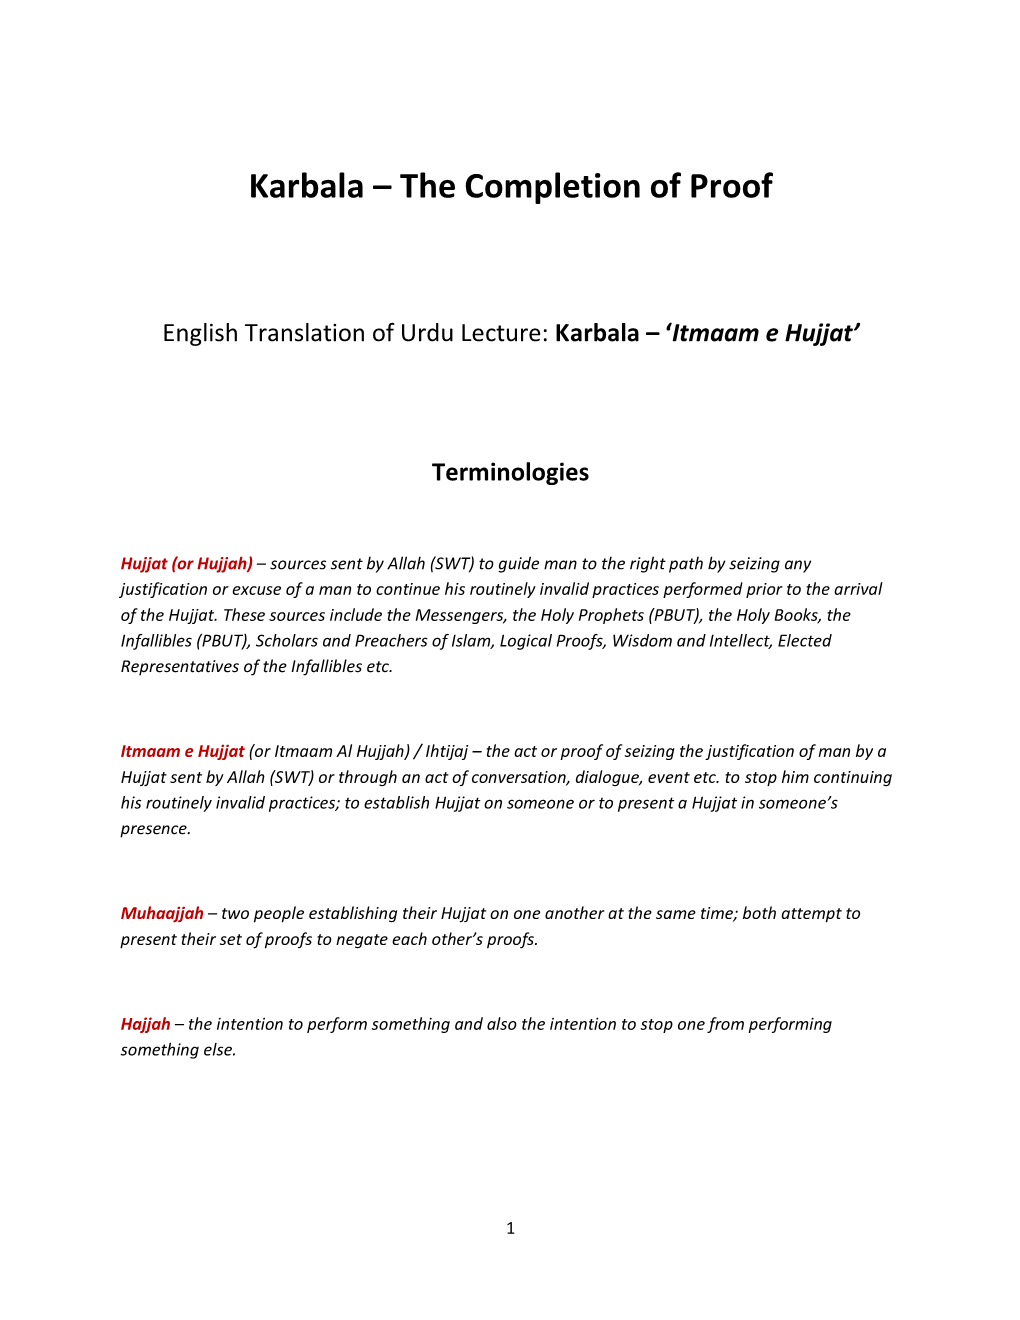 Karbala – the Completion of Proof